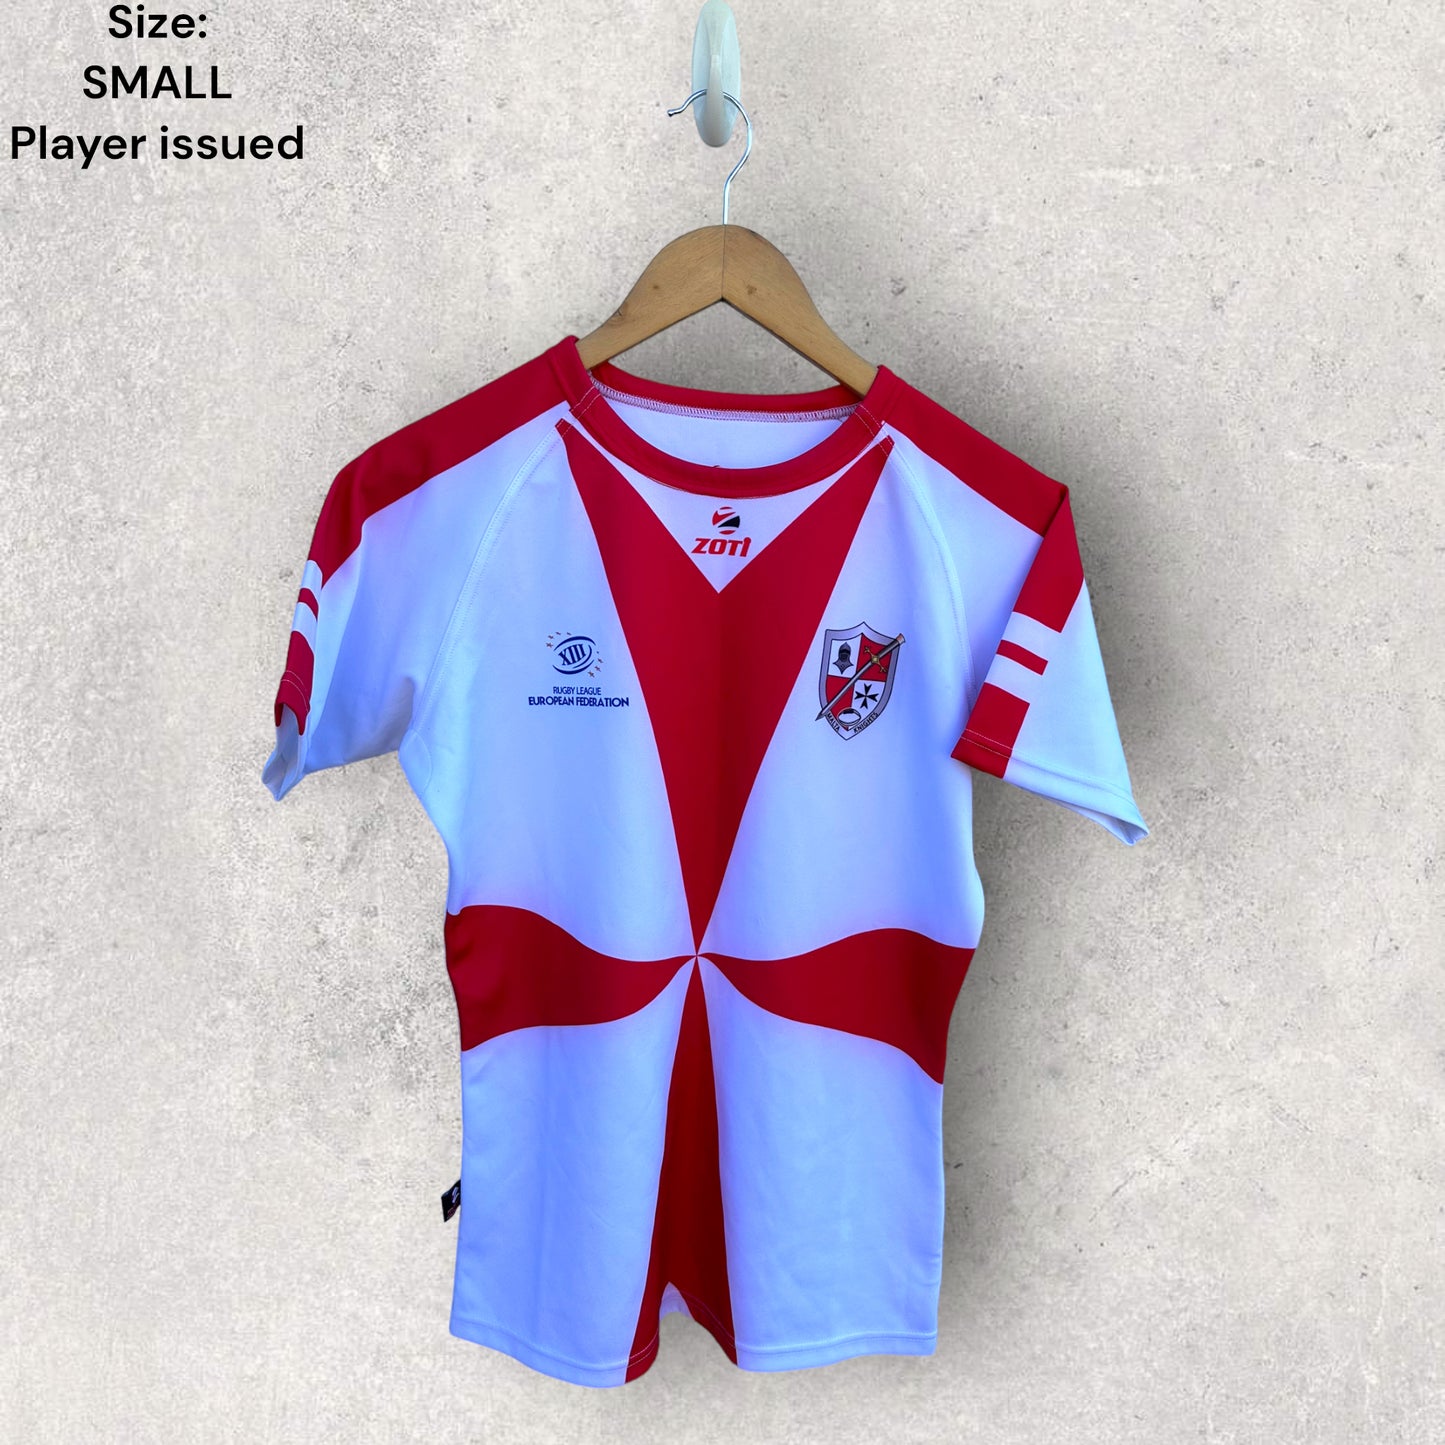 MALTA KNIGHTS RUGBY LEAGUE PLAYER JERSEY